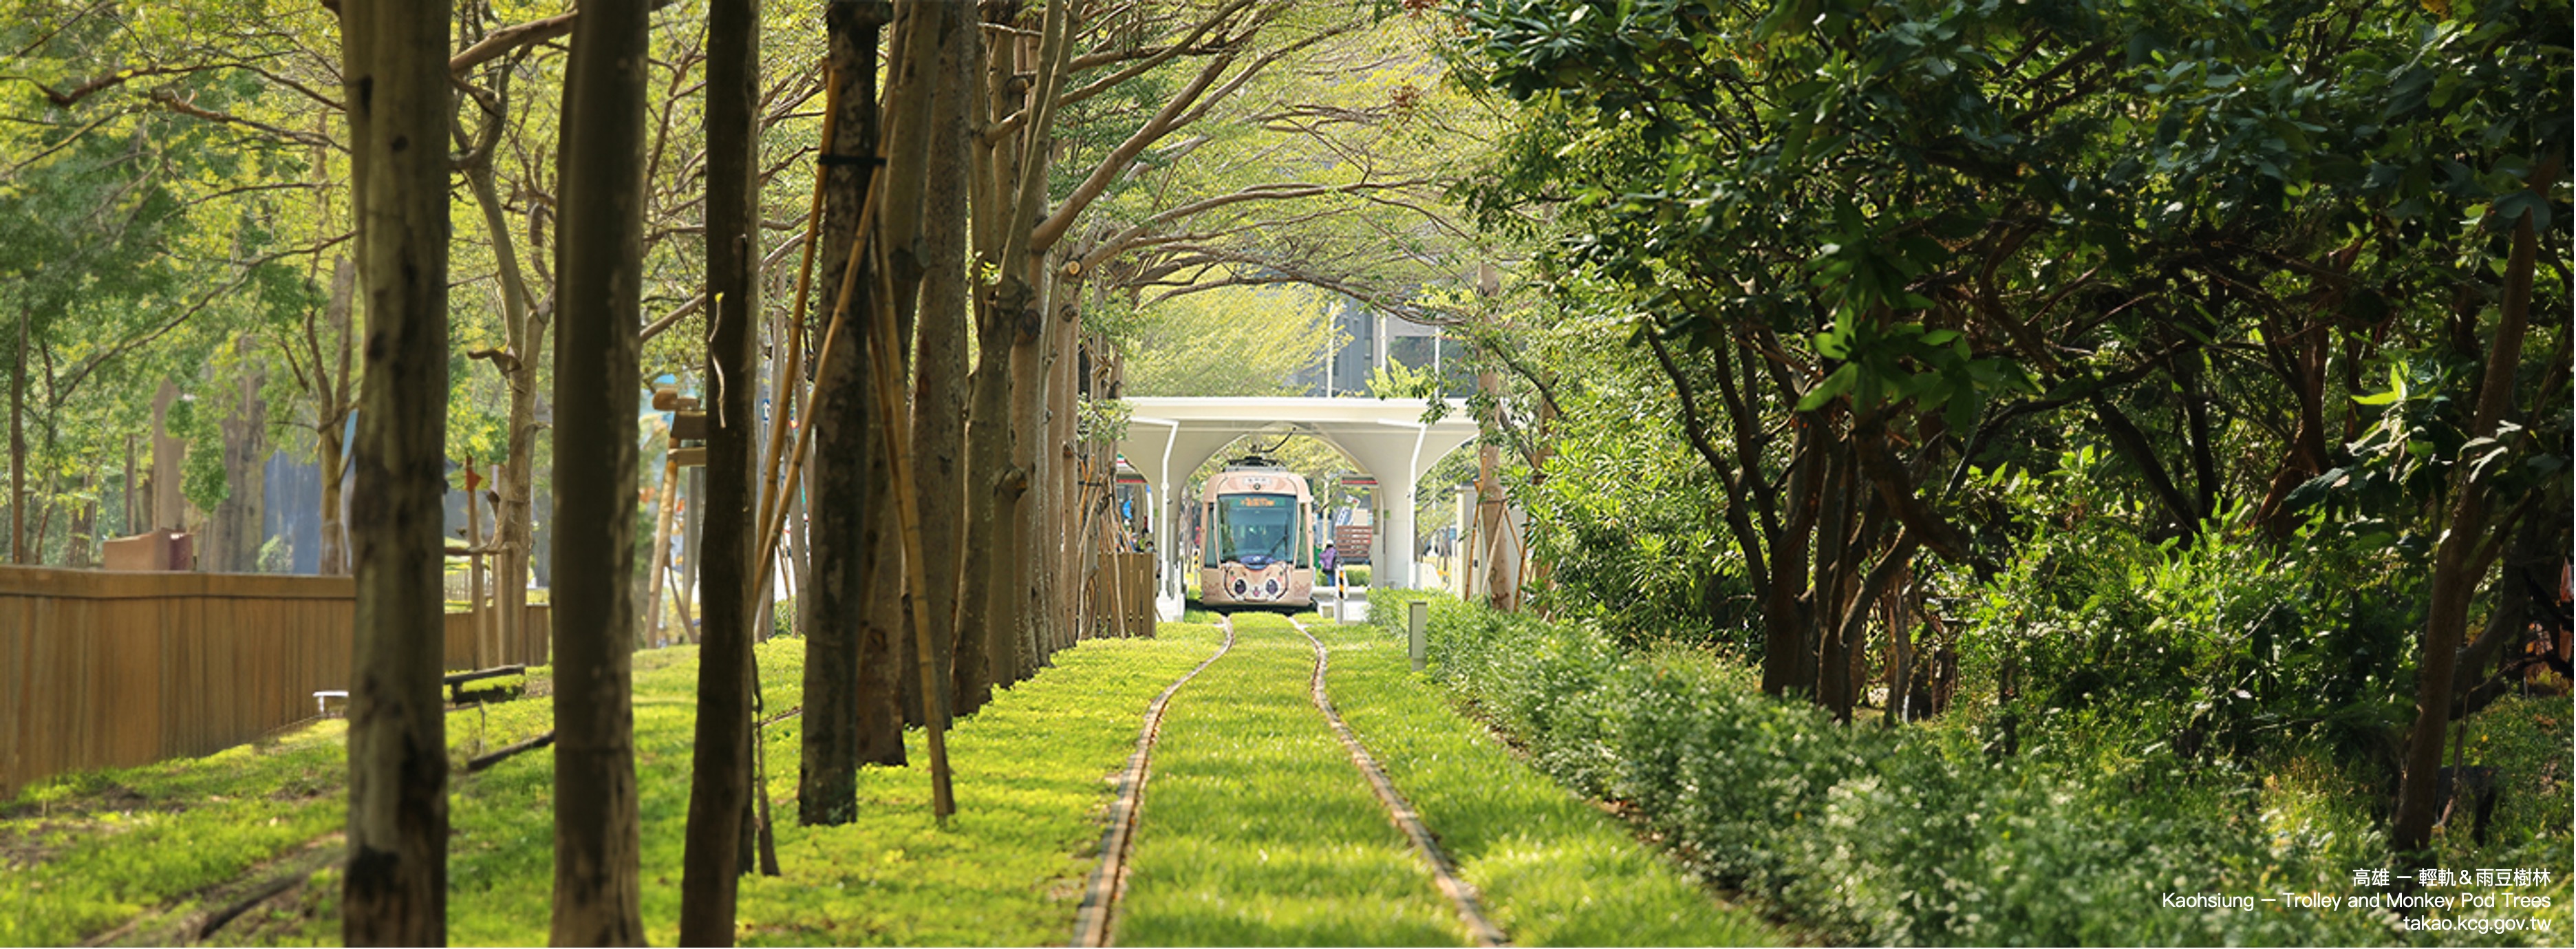 Kaohsiung trolley and monkey pod trees 